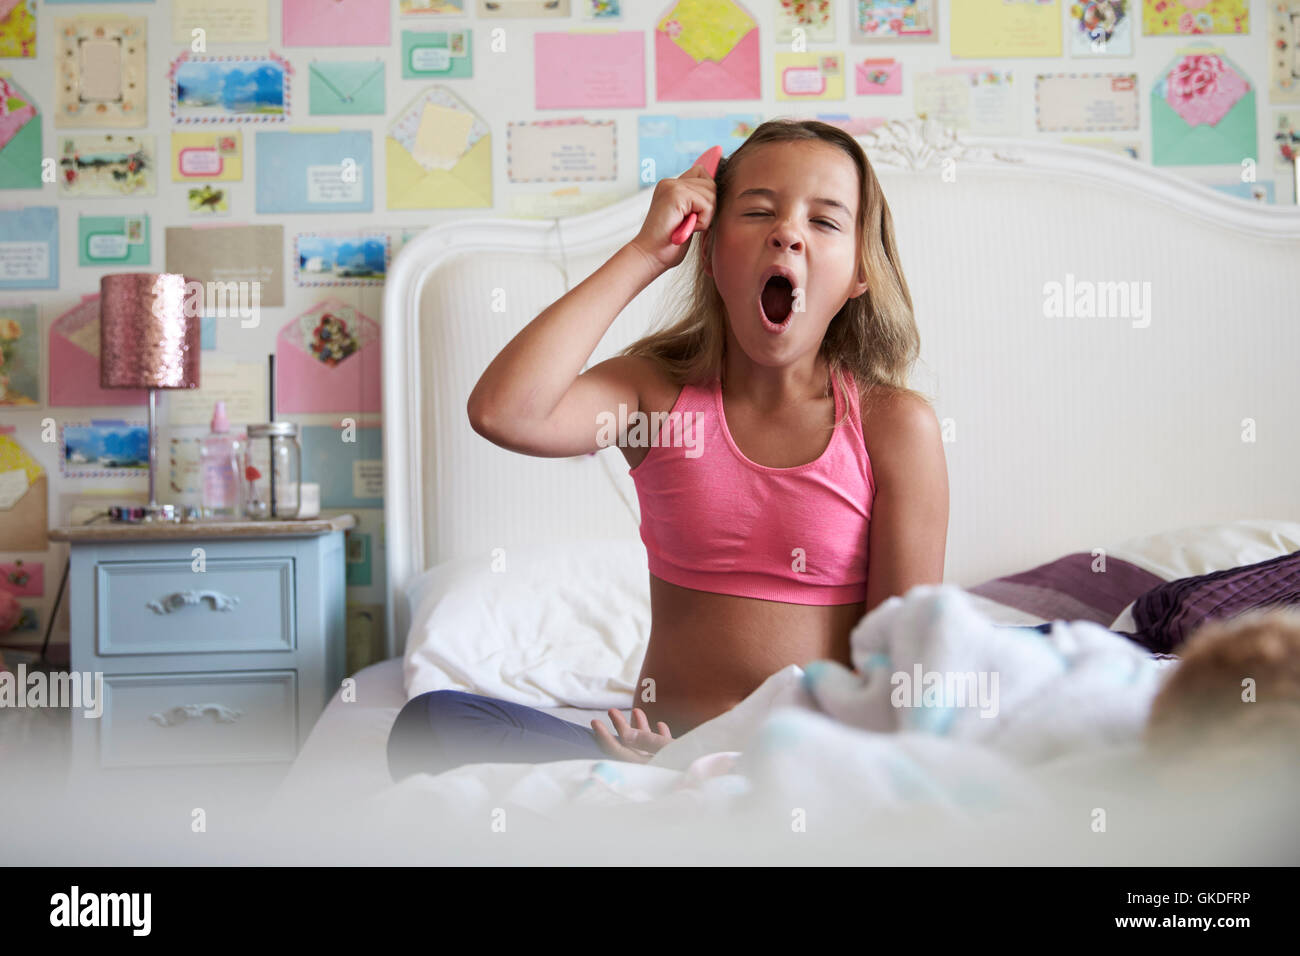 Young Girl Sitting On Bed And Brushing Hair Whilst Yawning Stock Photo